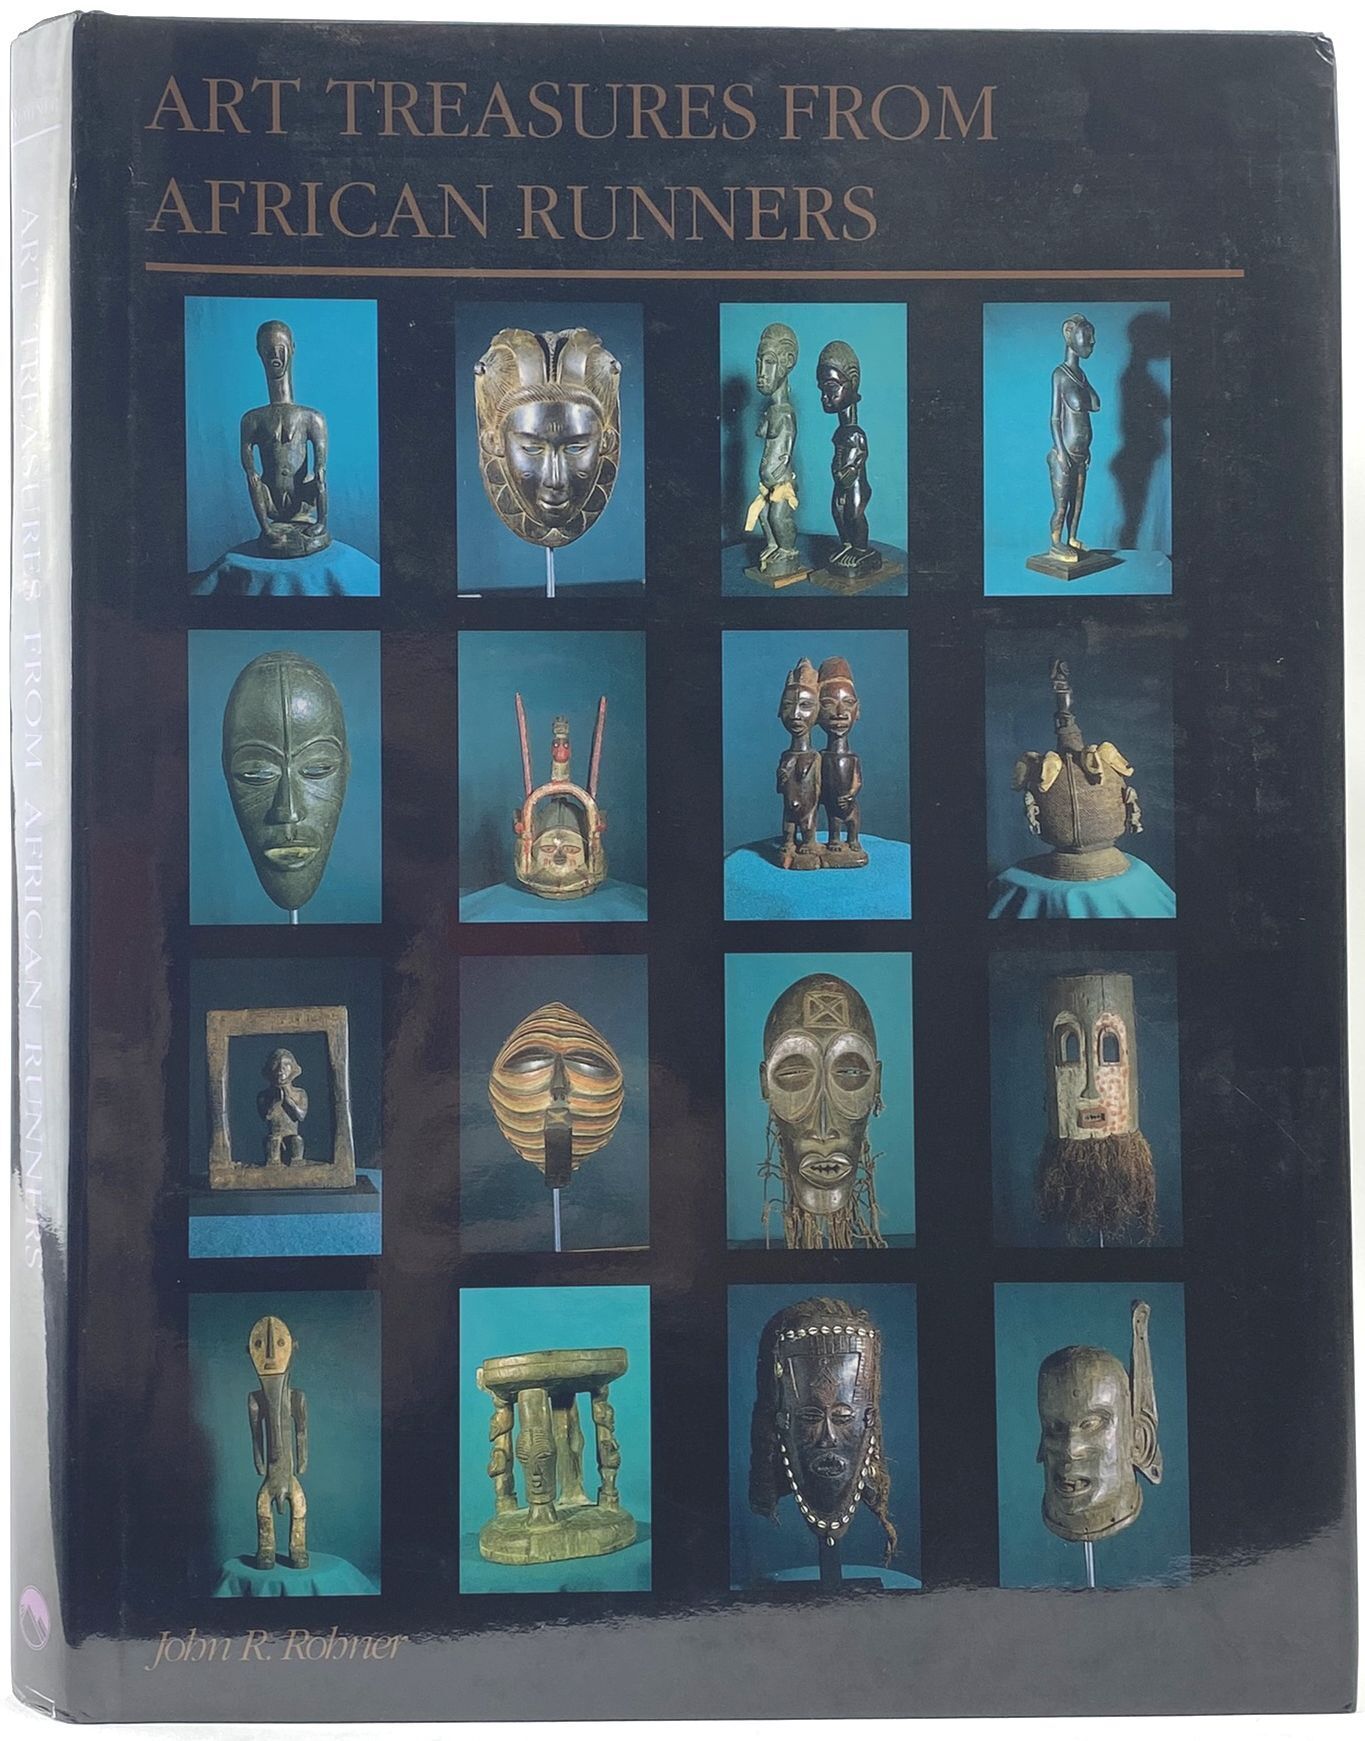 Null ROHNER John R.

Art Treasures from African Runners, University Press of Col&hellip;